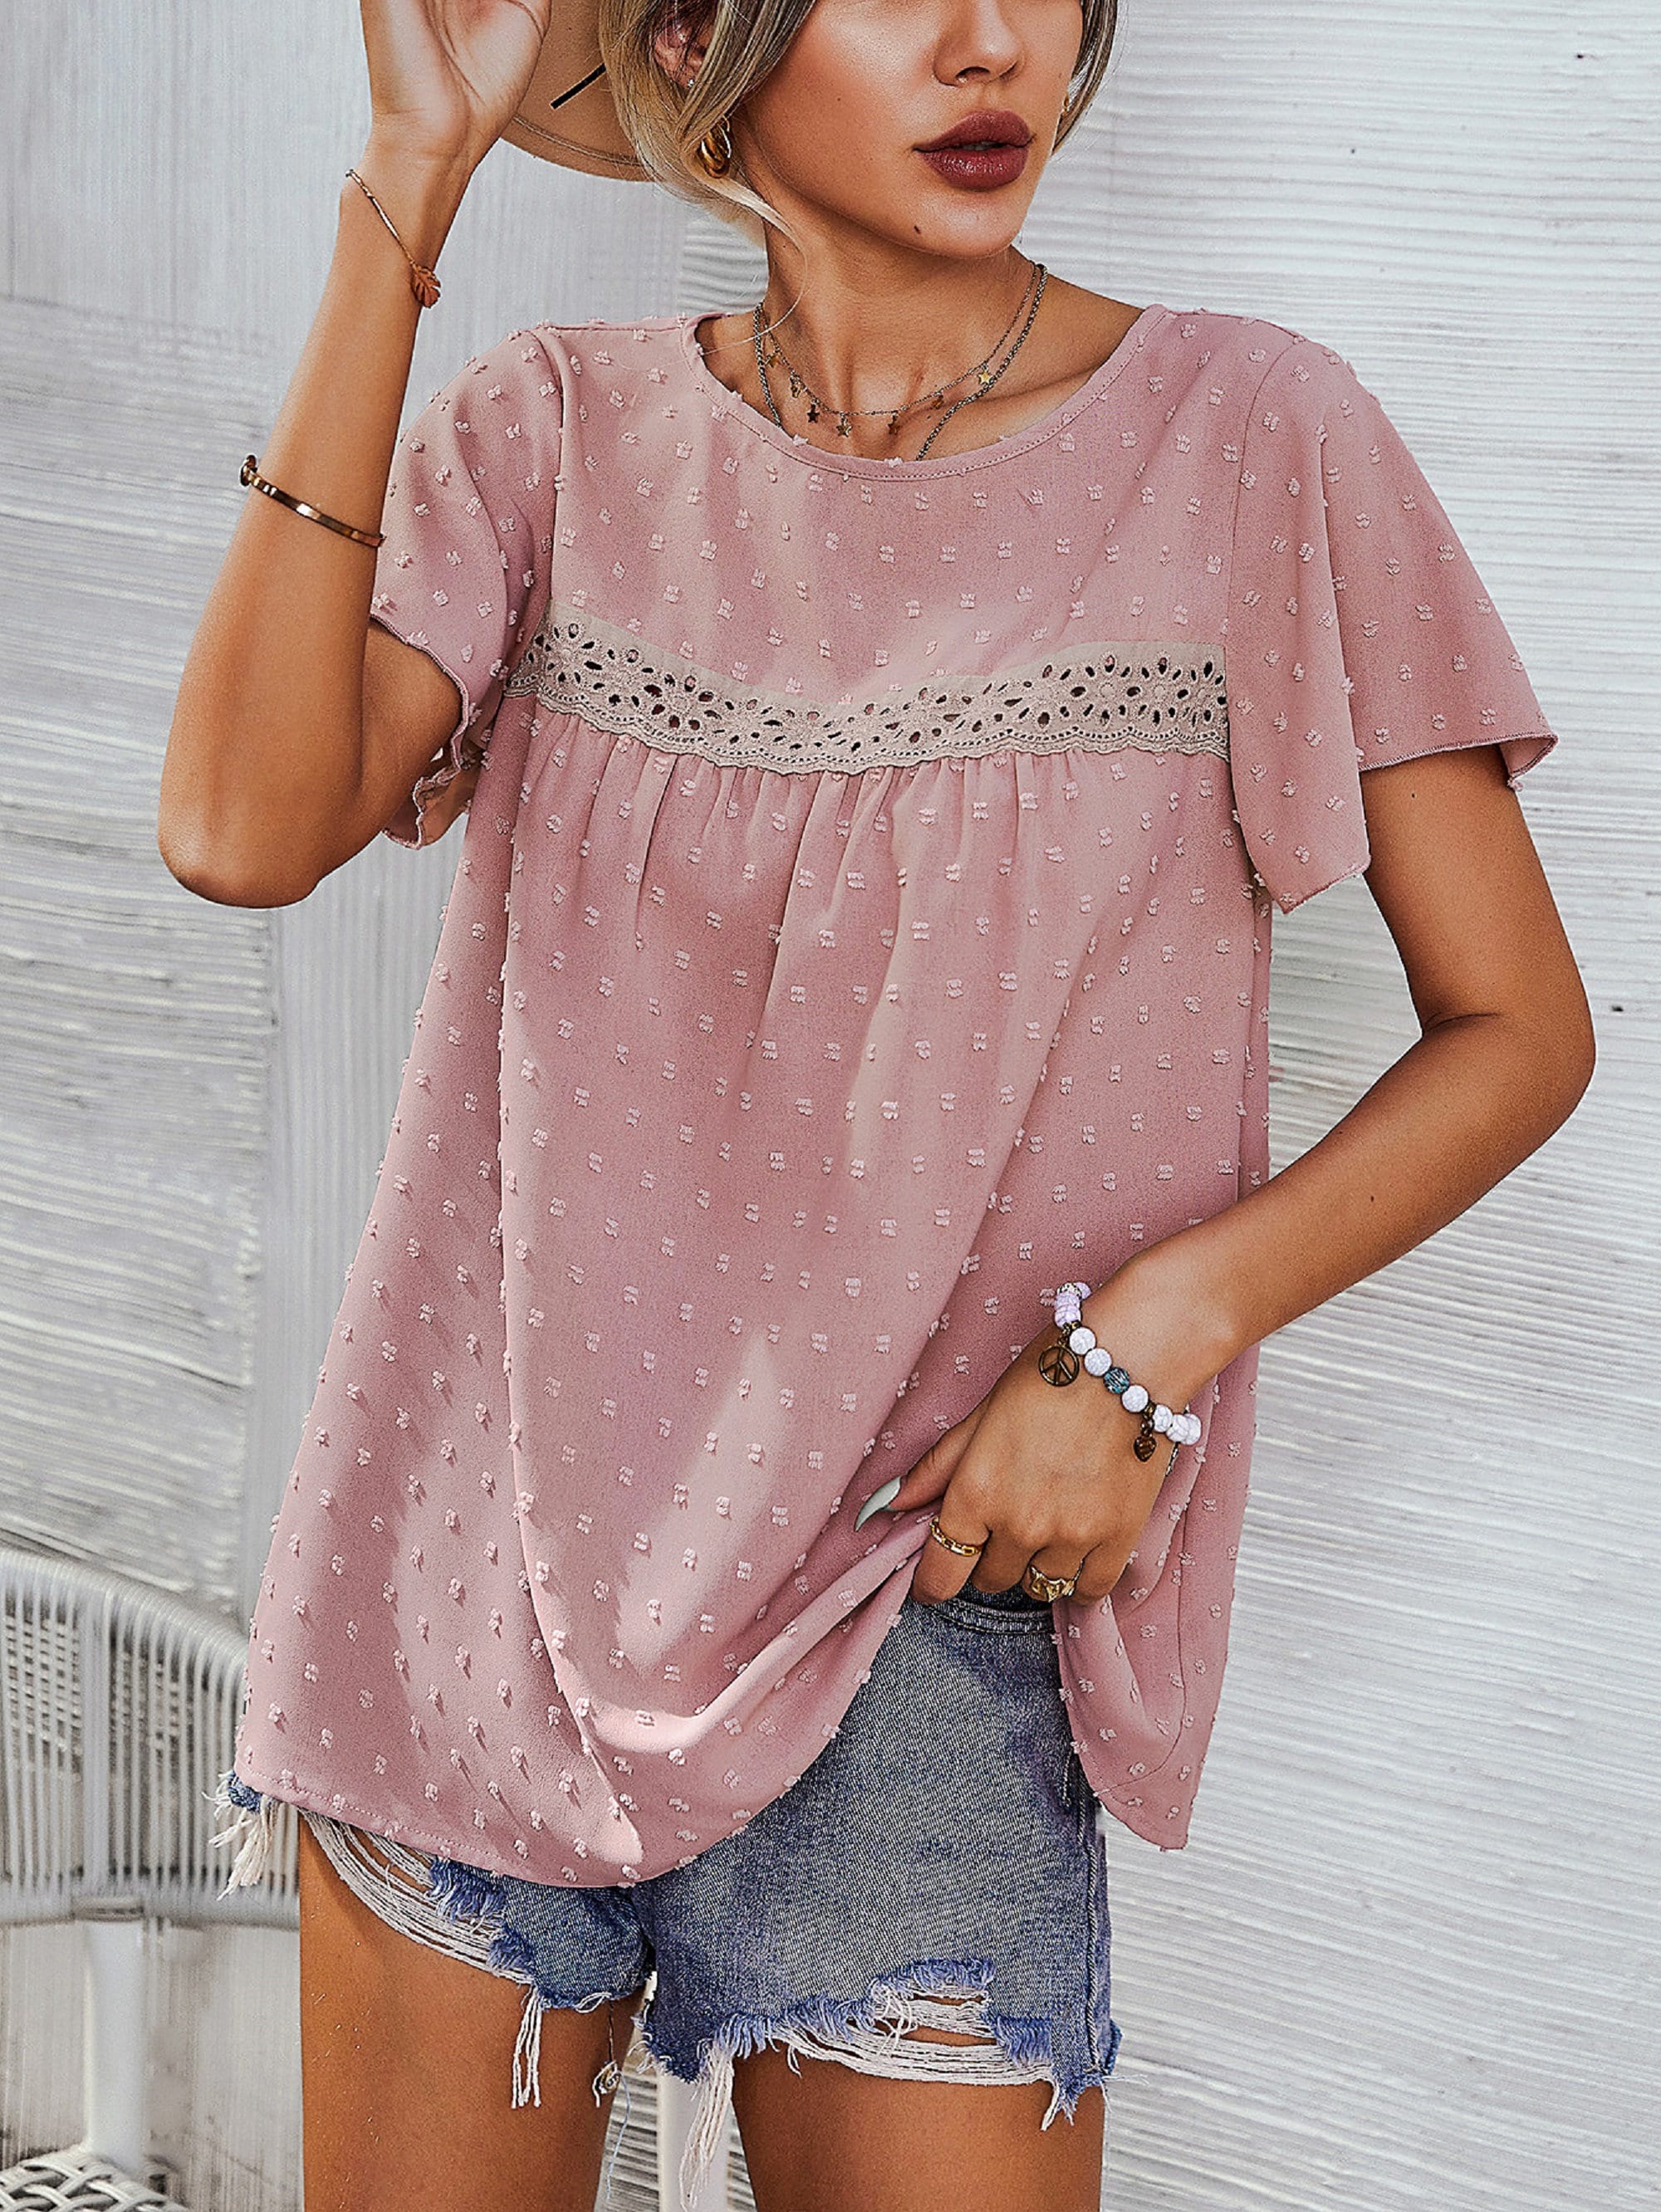 Lace Front Spring Summer Top, short sleeve Bohemian Spring Blouse - Summer Top